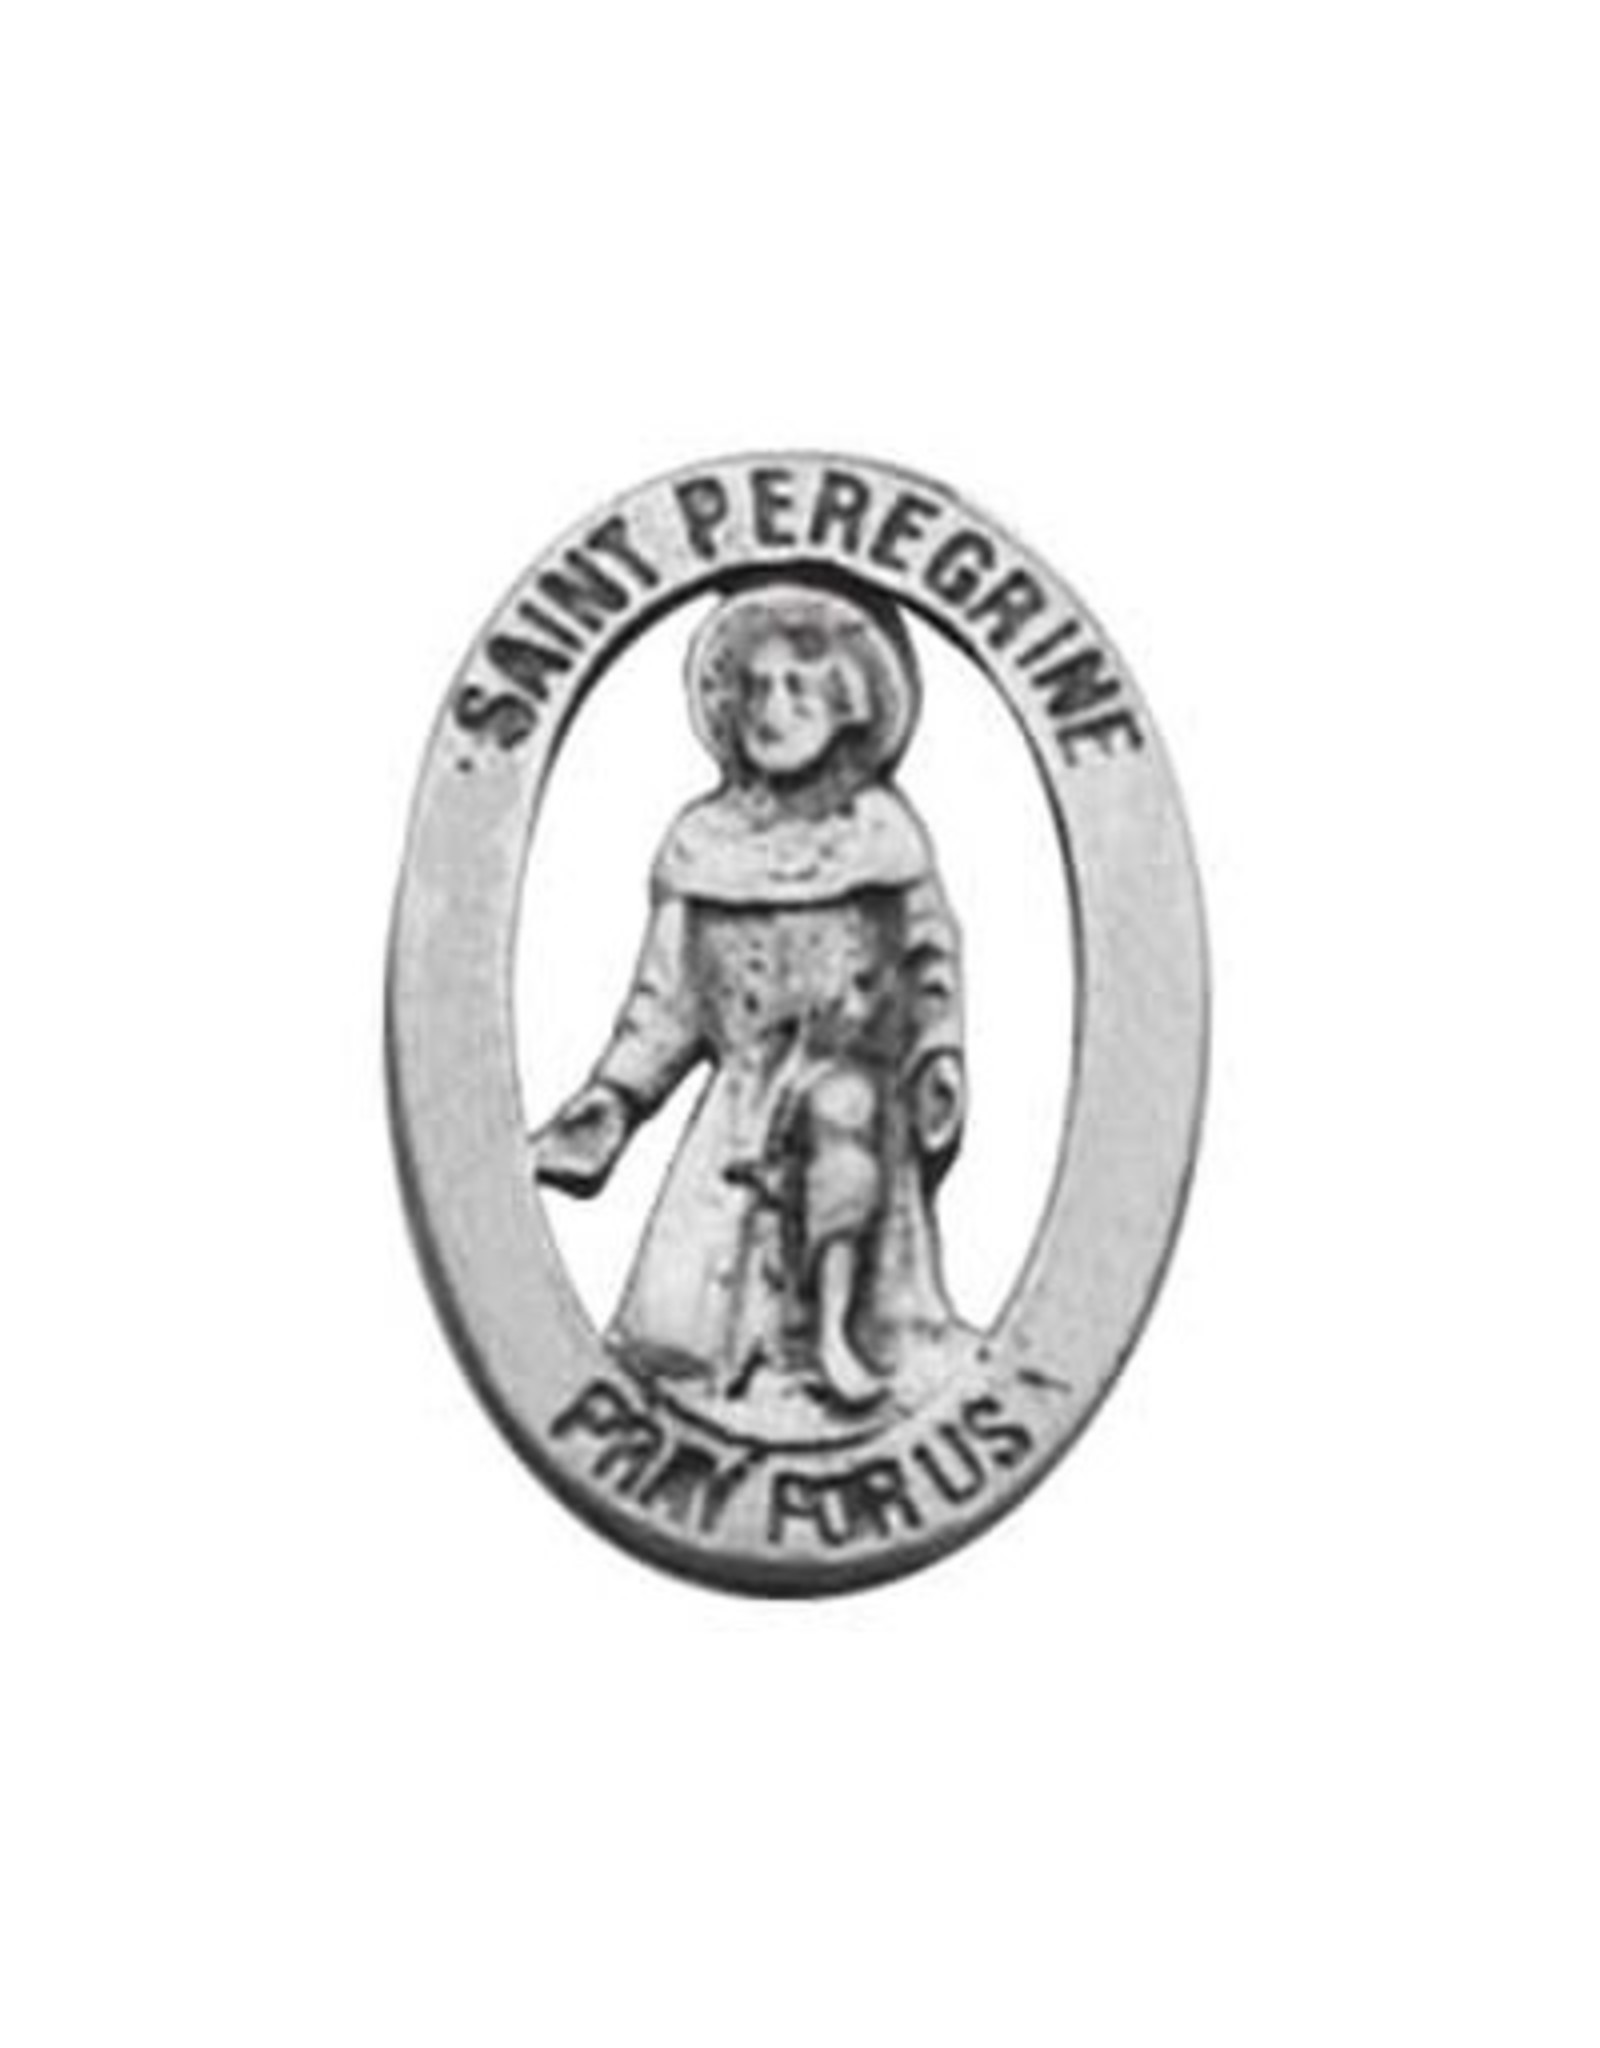 St. Peregrine Lapel Pin, Carded